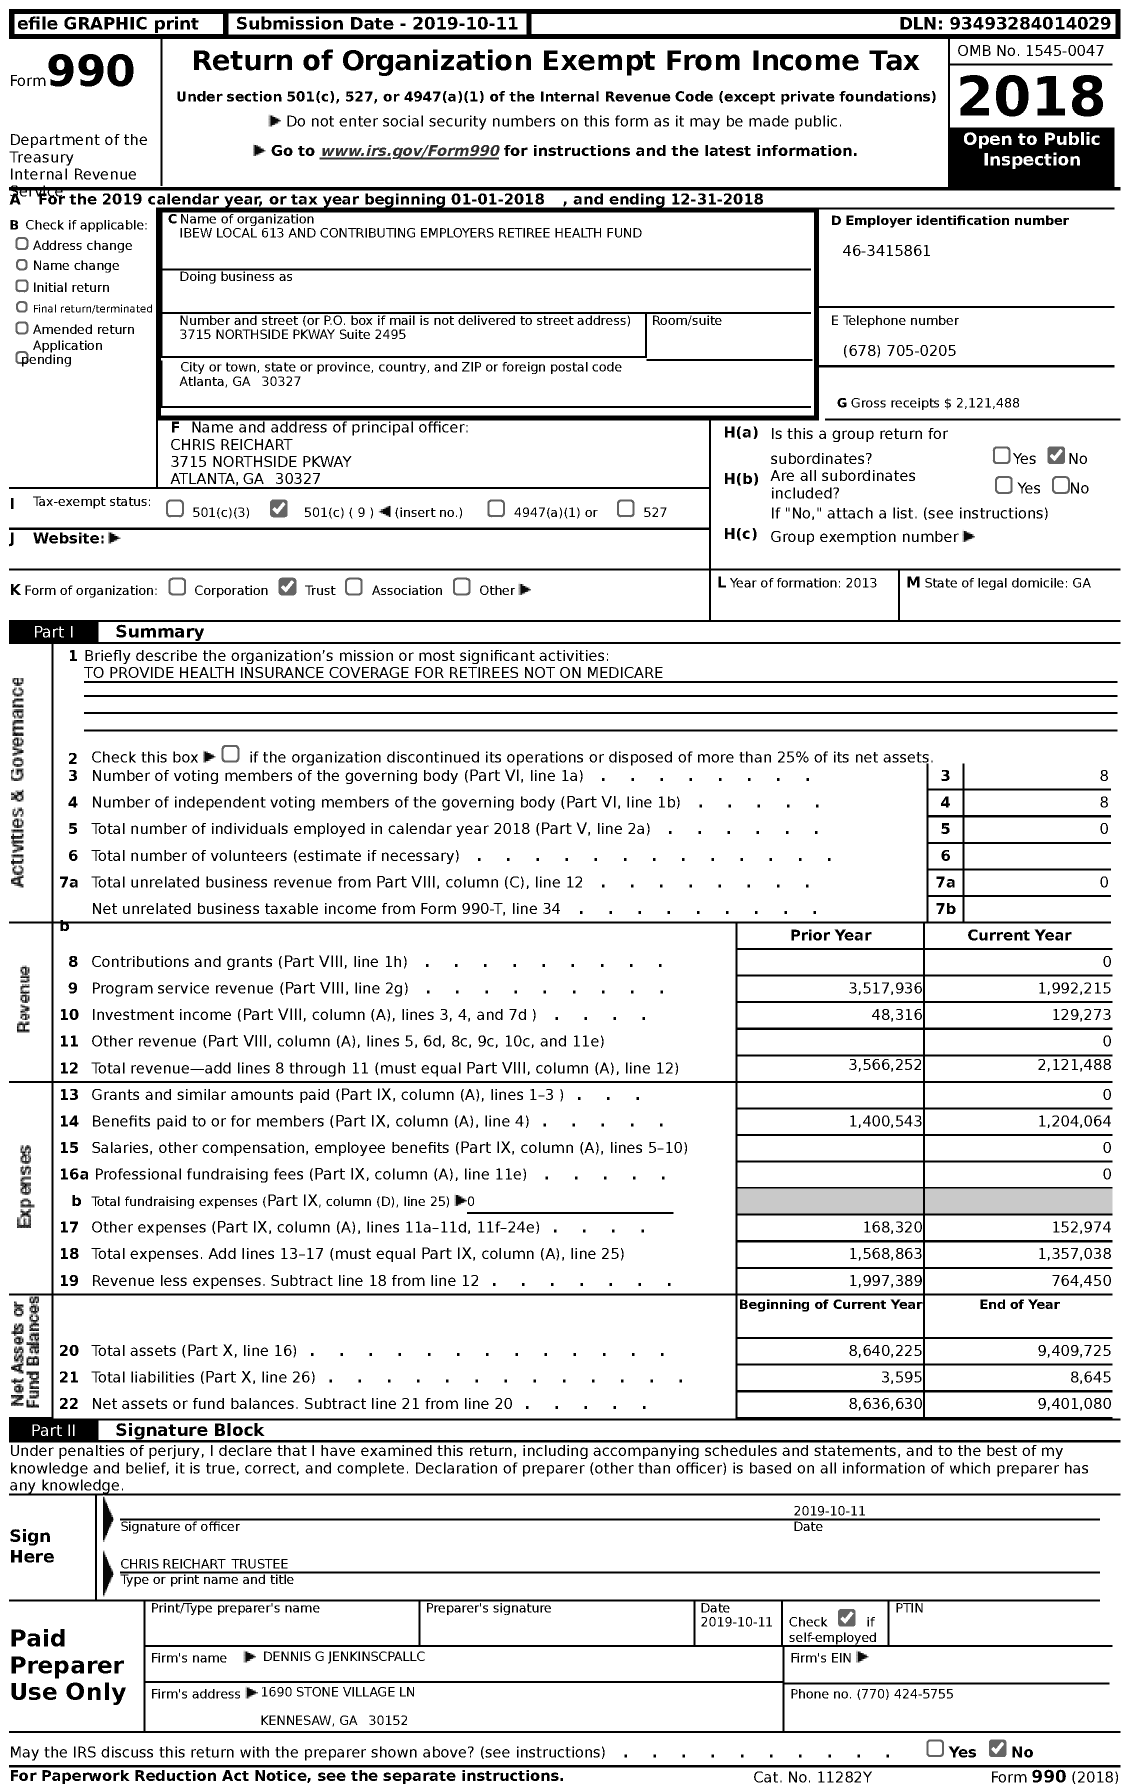 Image of first page of 2018 Form 990 for IBEW Local 613 and Contributing Employers Retiree Health Fund